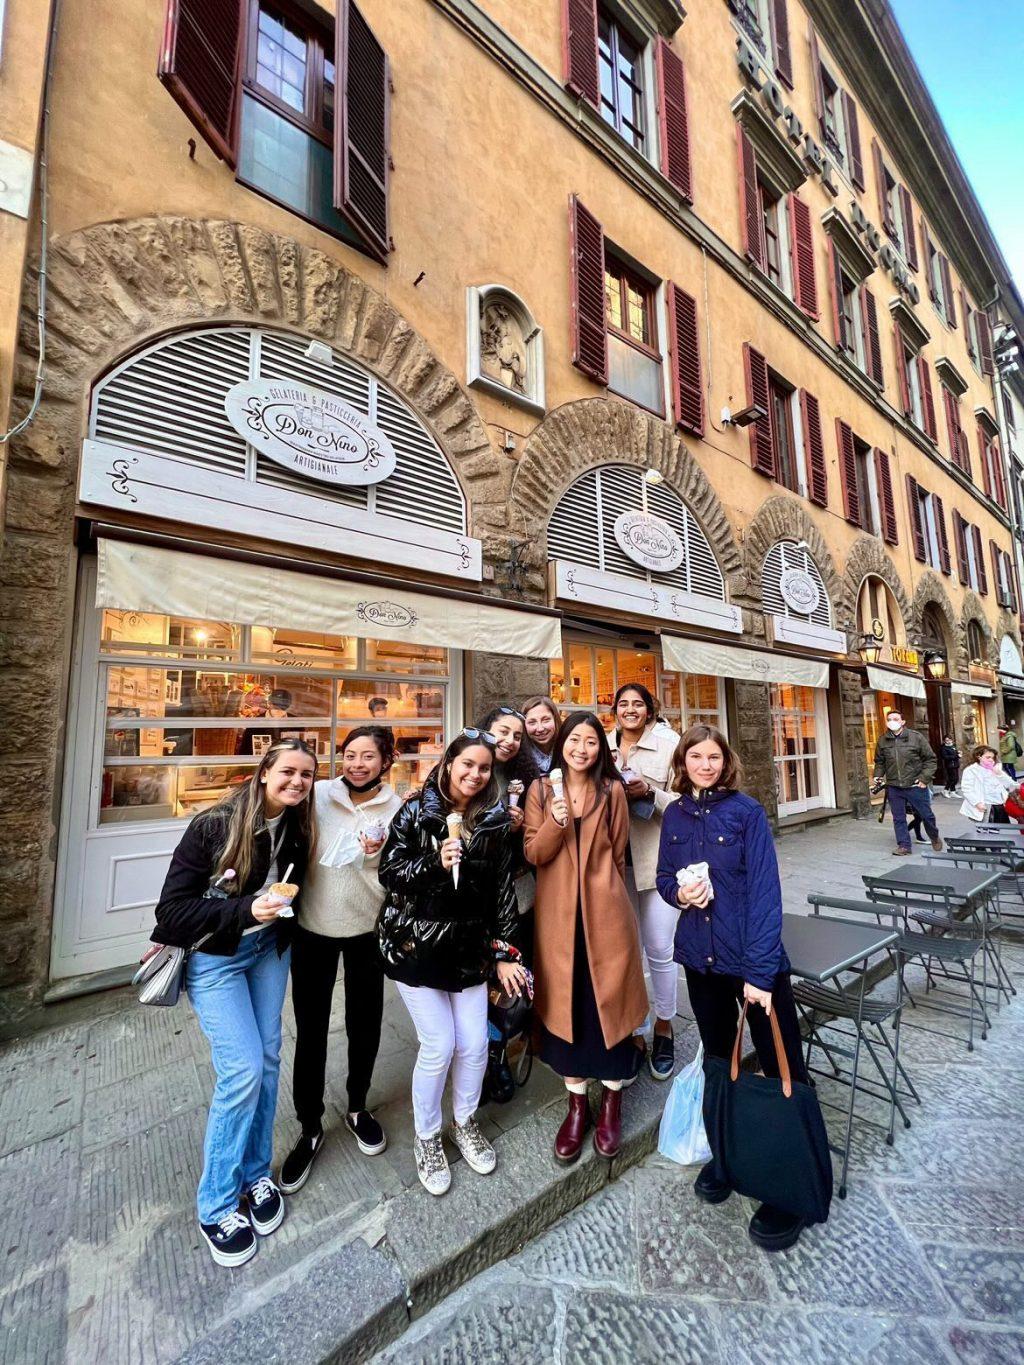 On January 15, Tadros and other Florence participants enjoying authentic Italian gelato. Participants enjoy the little things that Italy brings them. Photo courtesy of Melanie Tadros